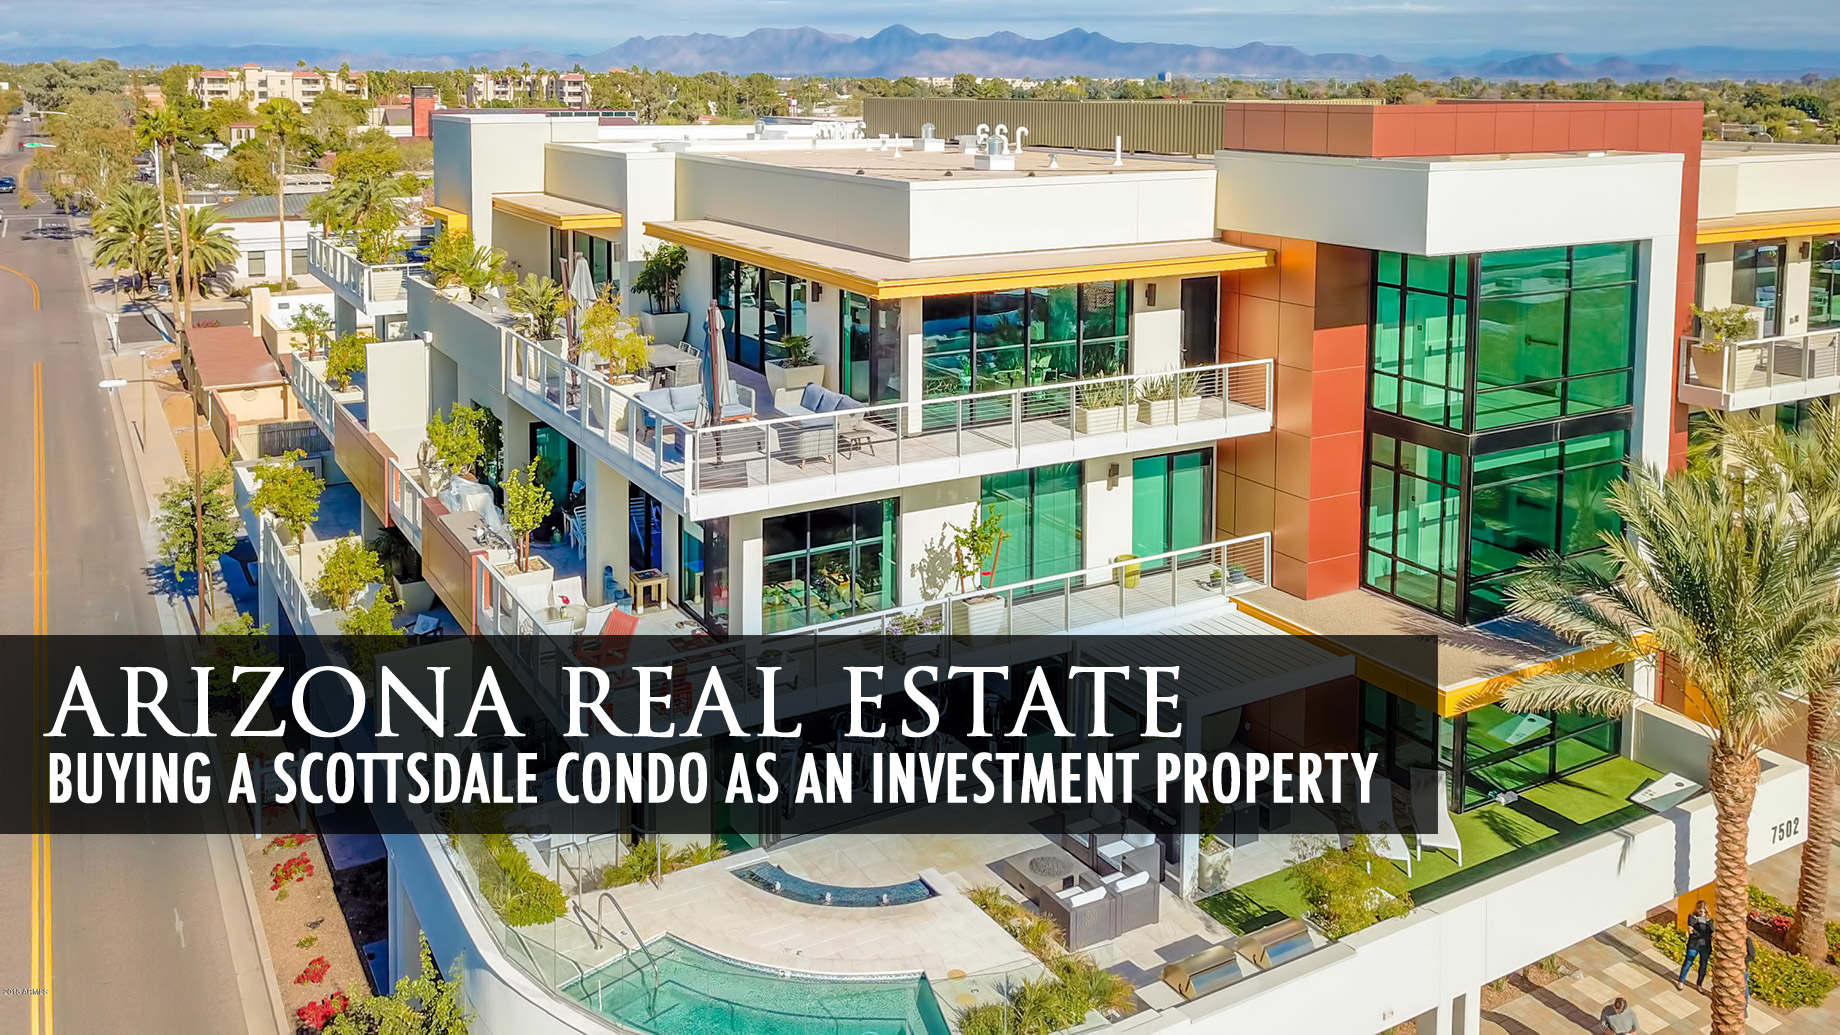 Arizona Real Estate - Buying a Scottsdale Condo as an Investment Property